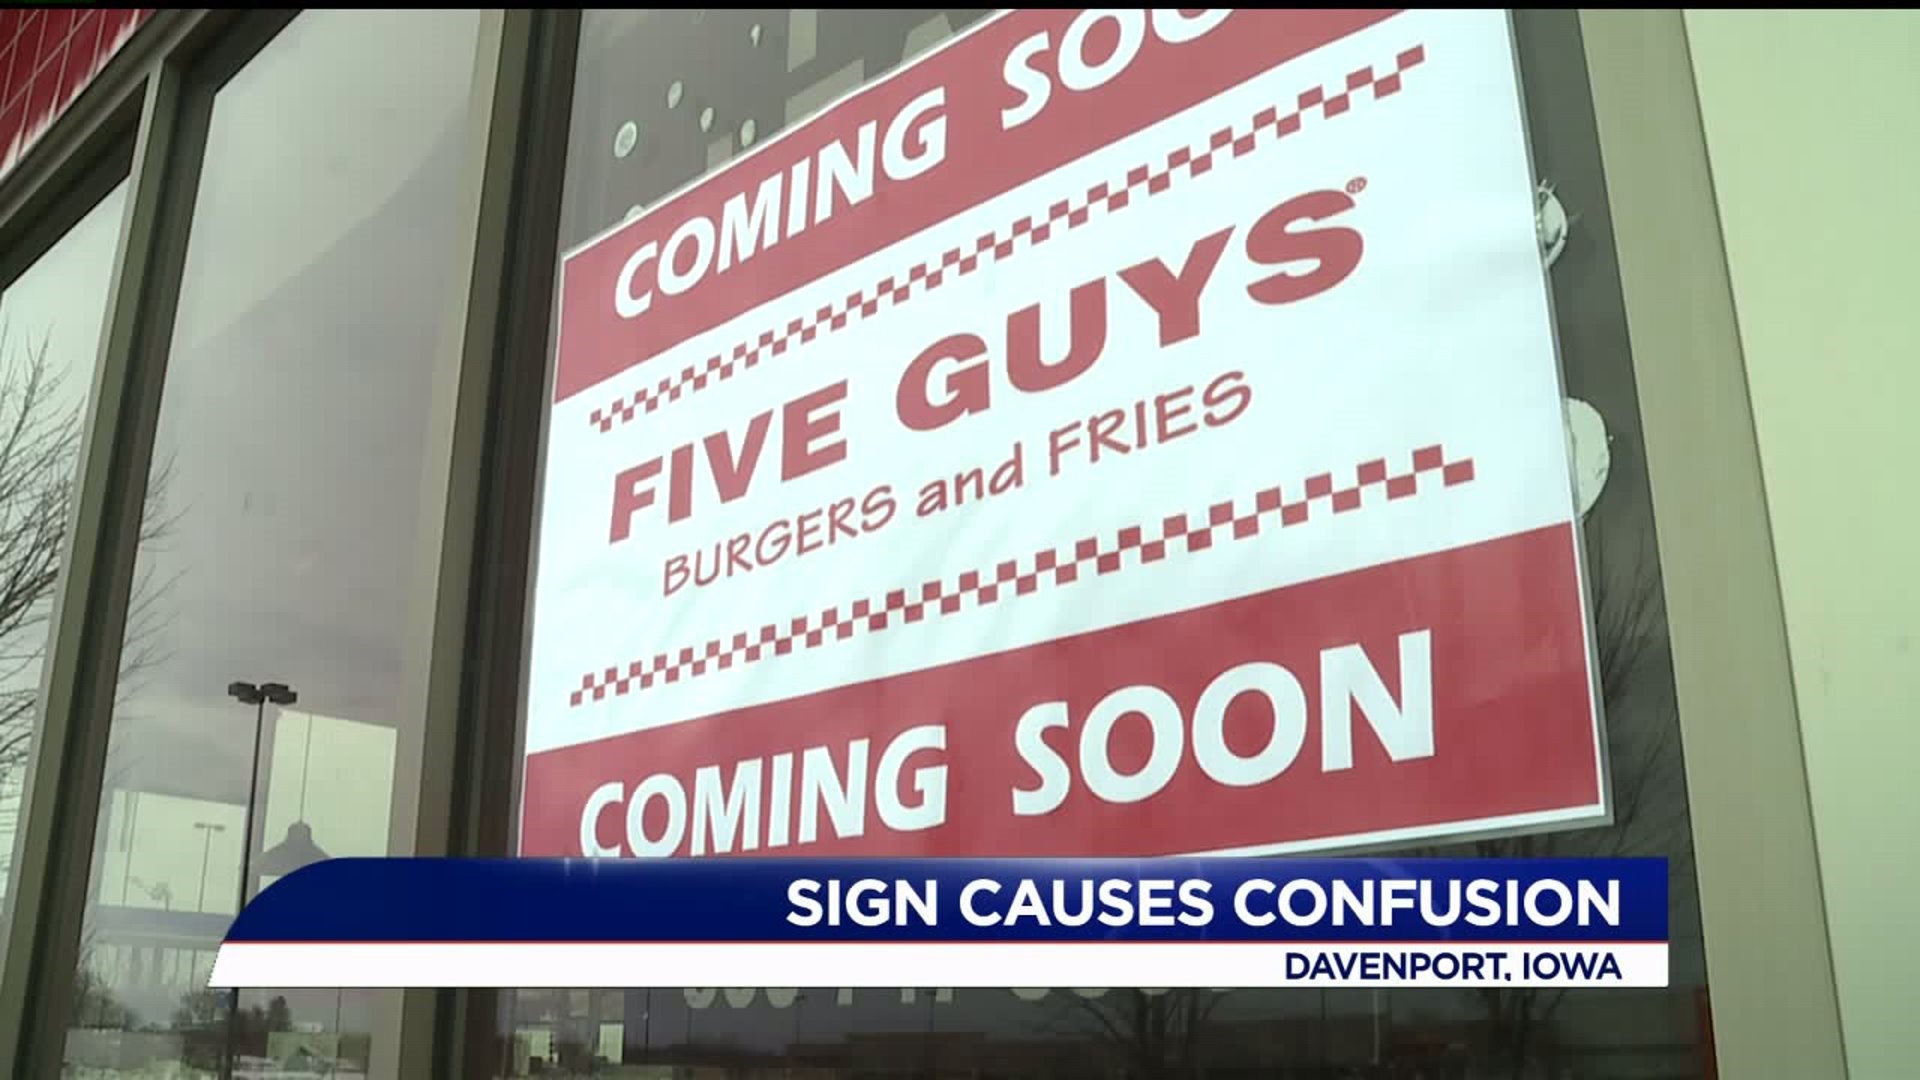 Five Guys confusion